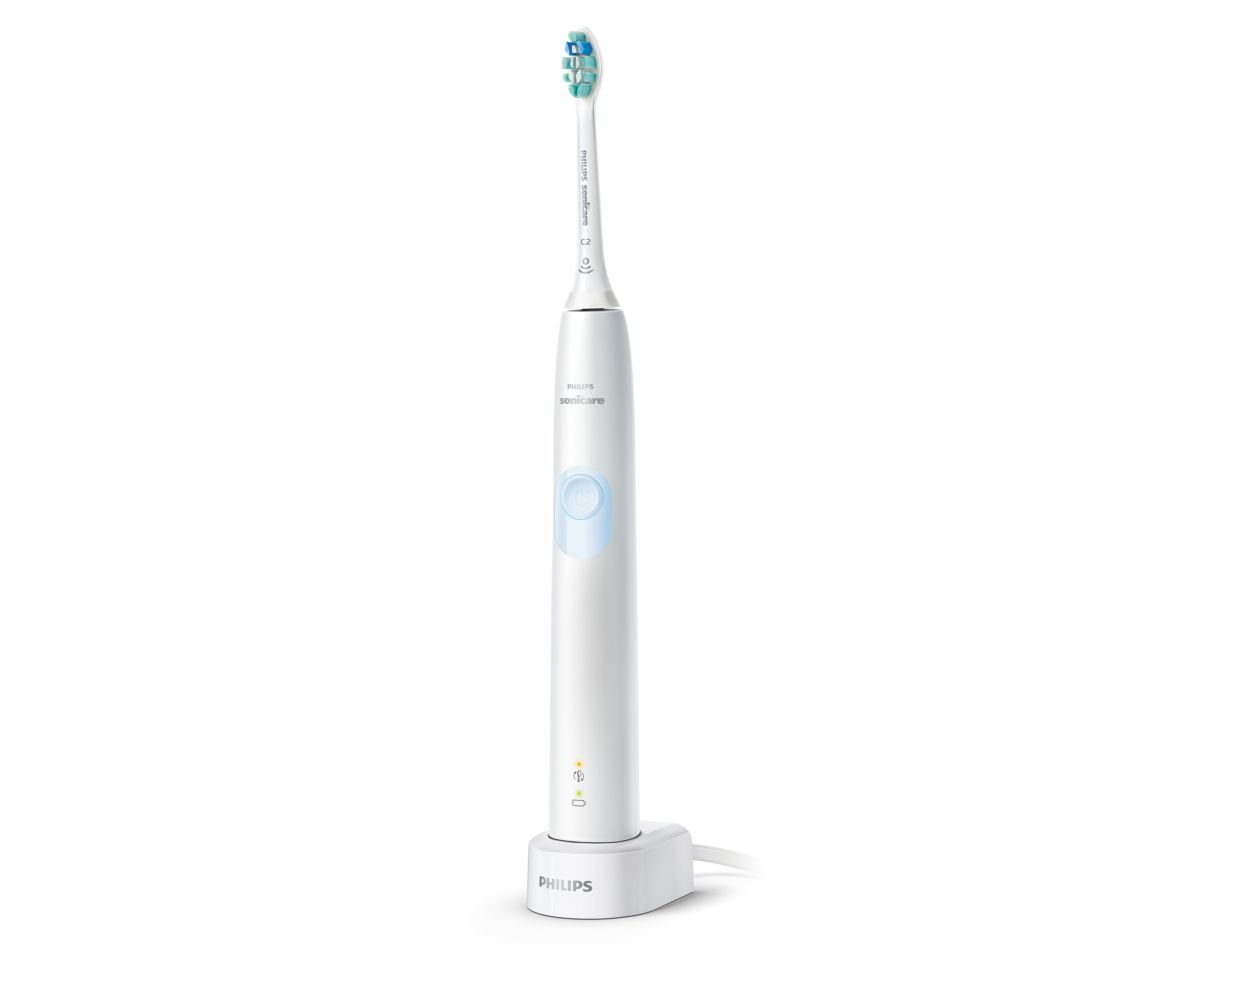 Protectclean ソニッケアー プロテクトクリーン Hx6819 05 Sonicare